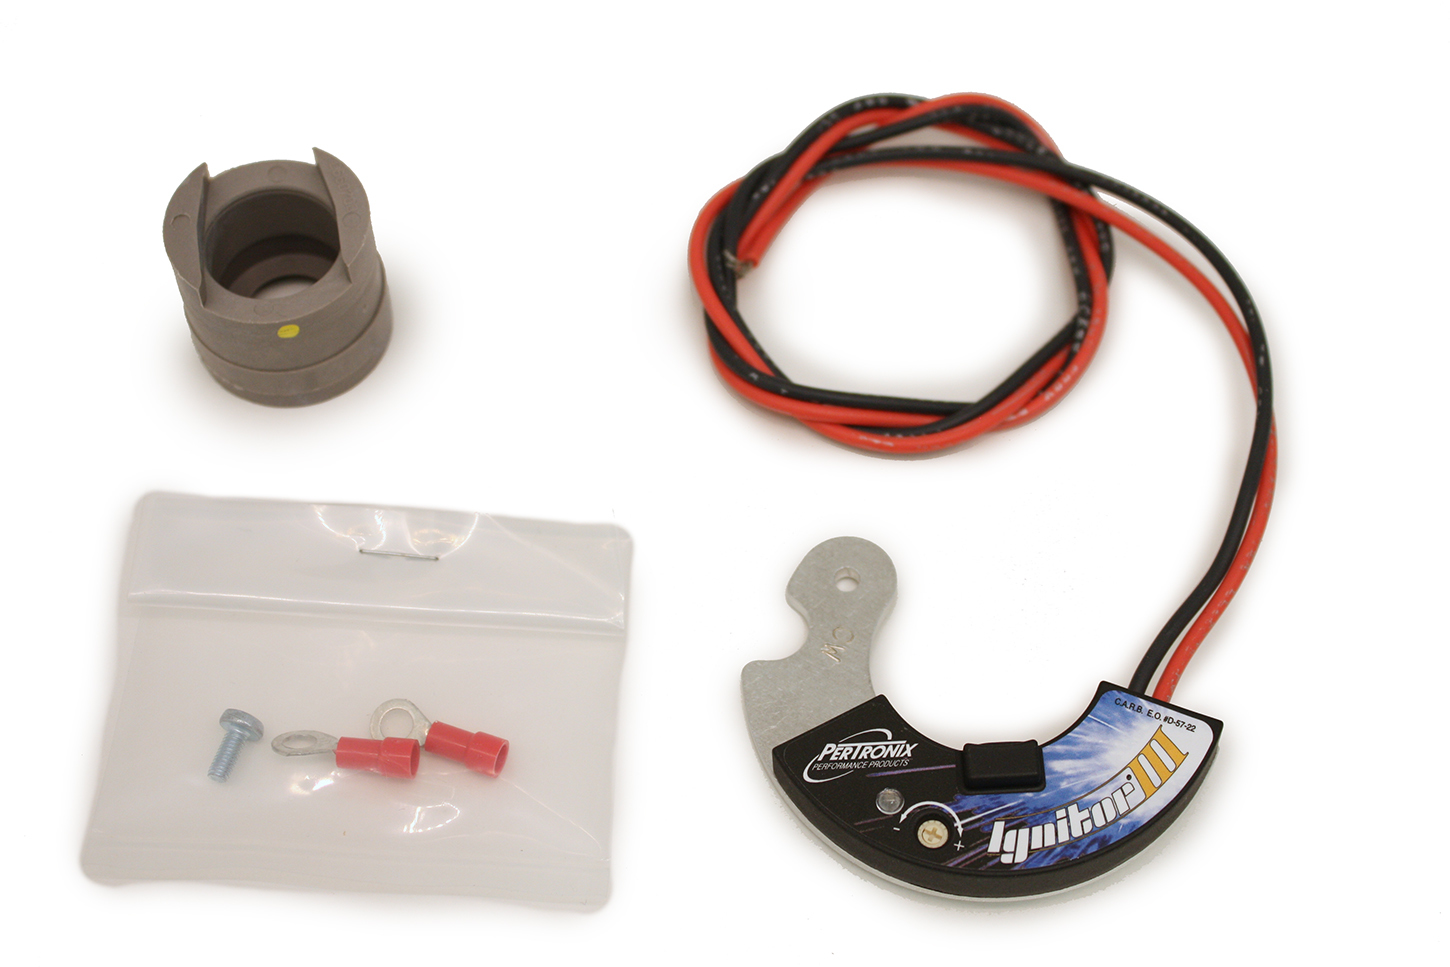 Pertronix Ignition D7500700 Ignition Control Module, Ignitor III, Pertronix Billet Distributors, Each